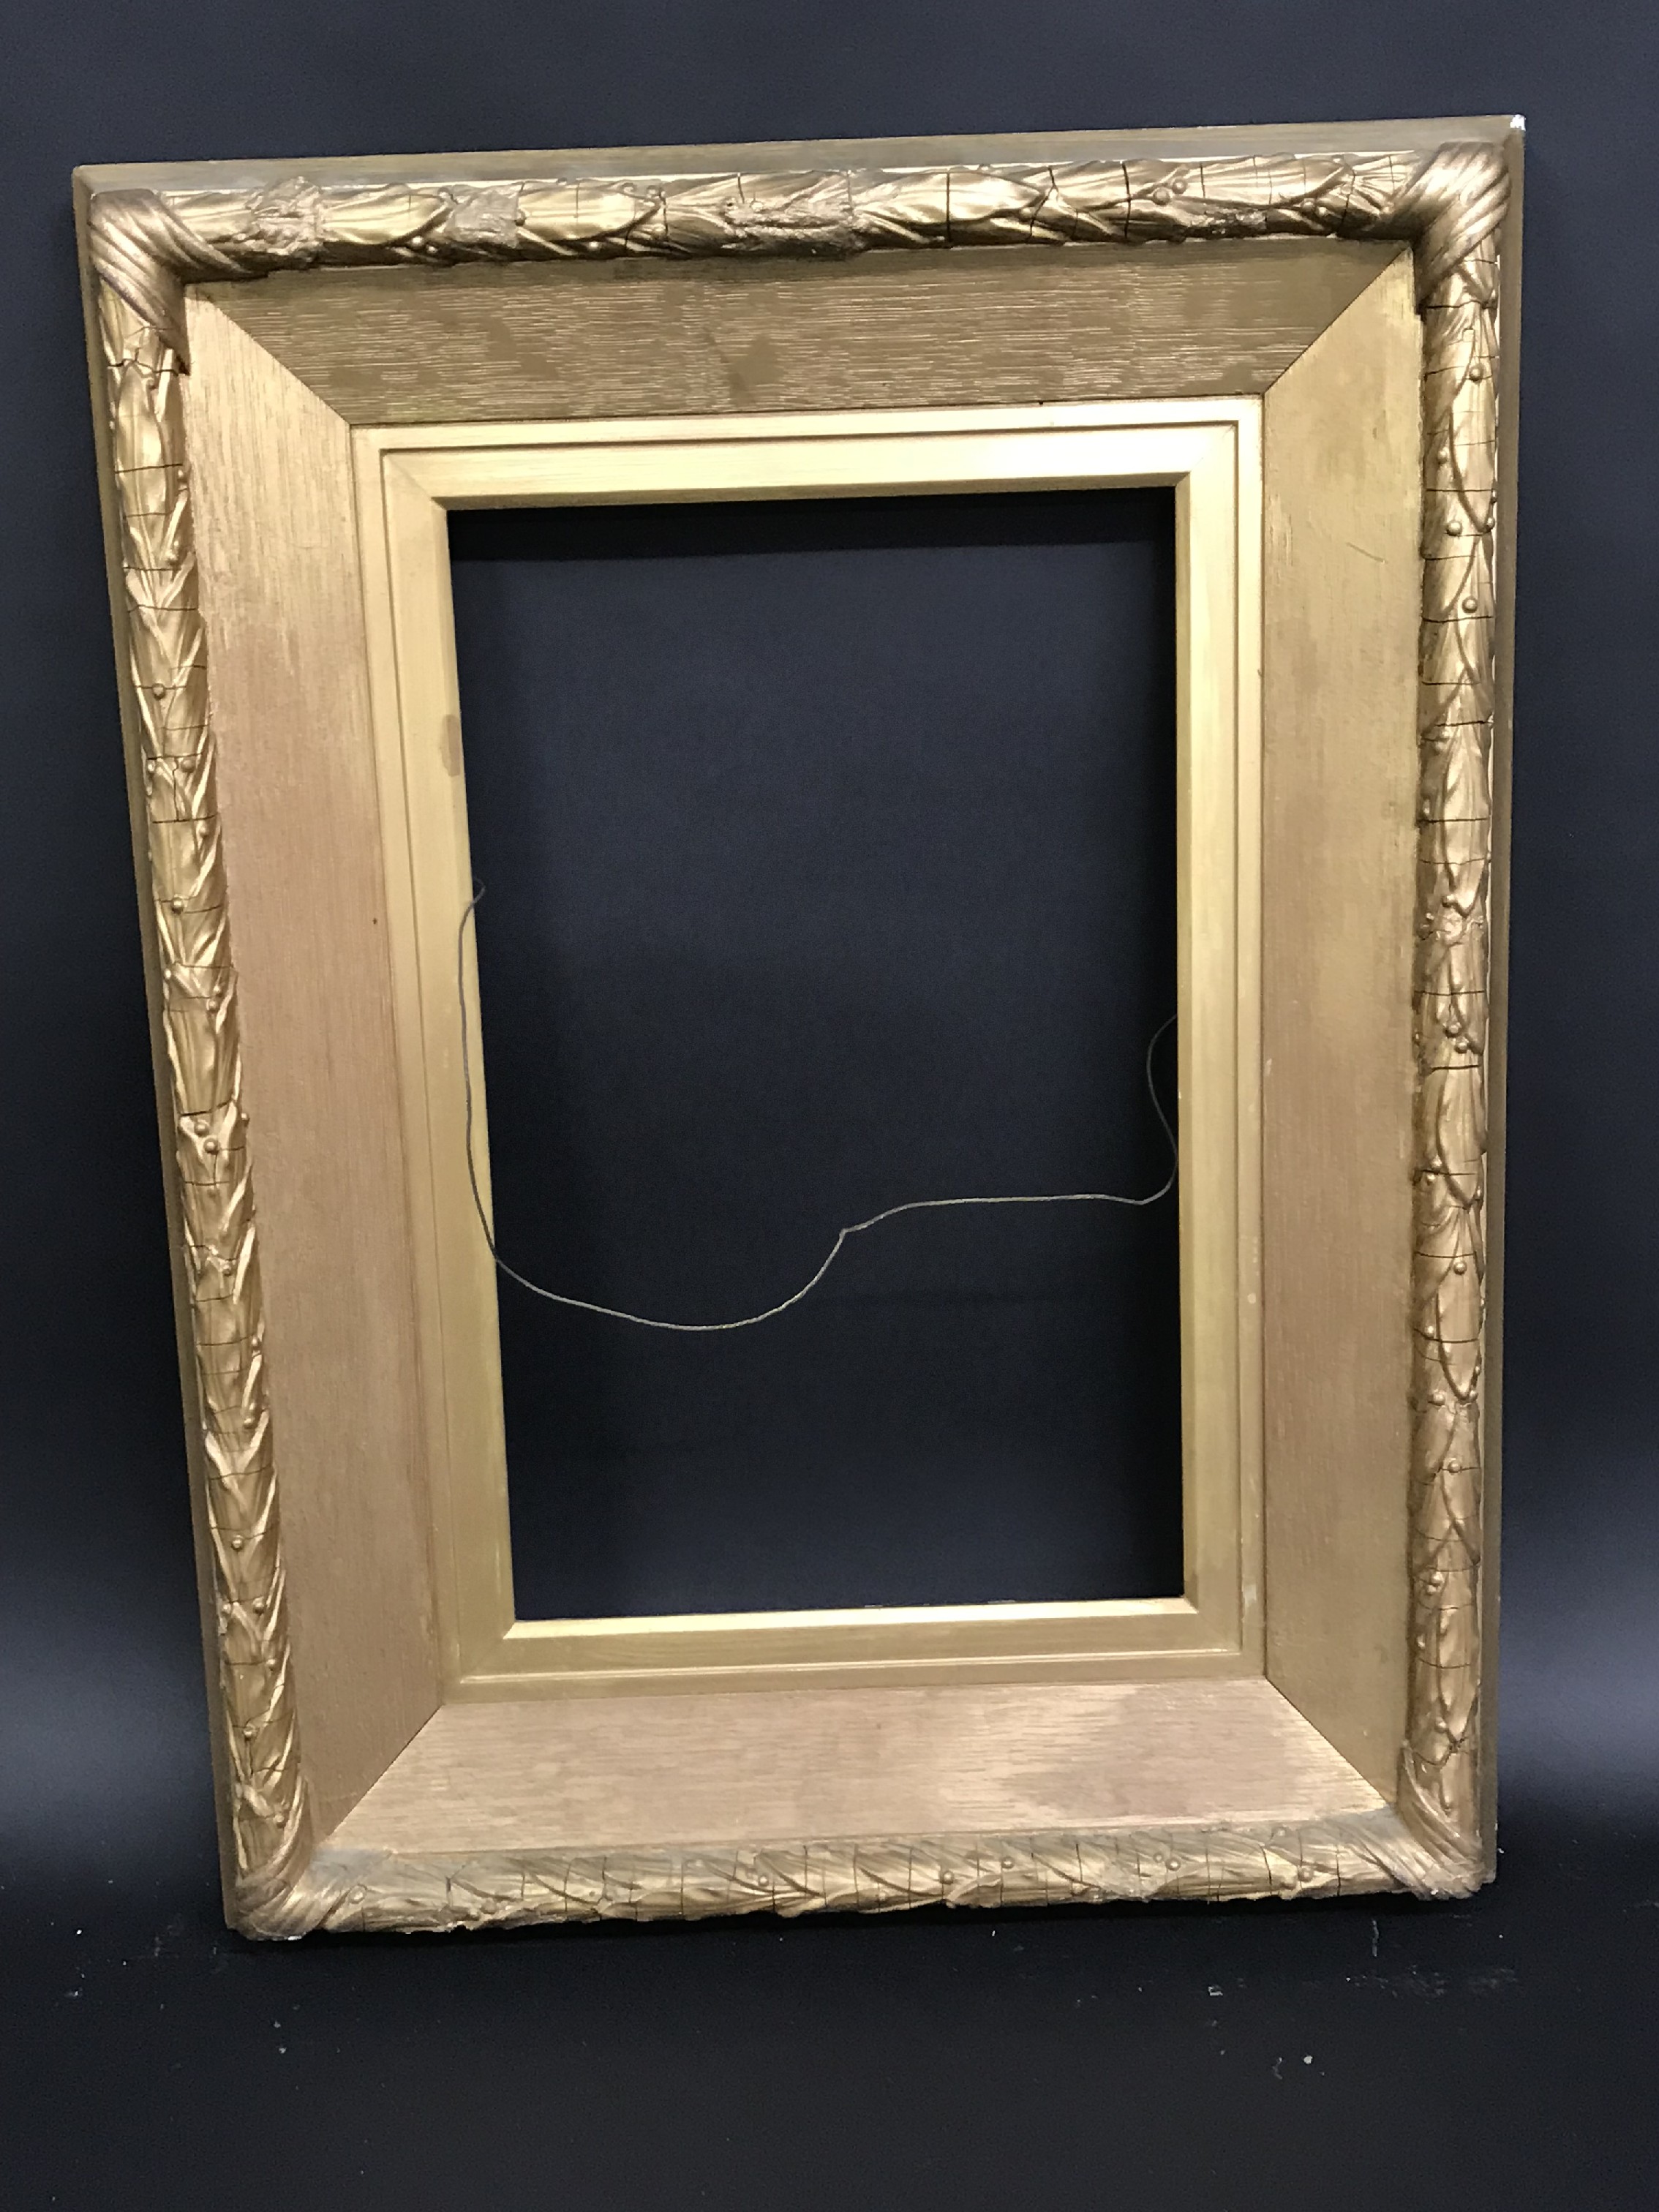 Late 19th Century English School. A Gilt Composition Frame, 16" x 10" (rebate). - Image 2 of 3